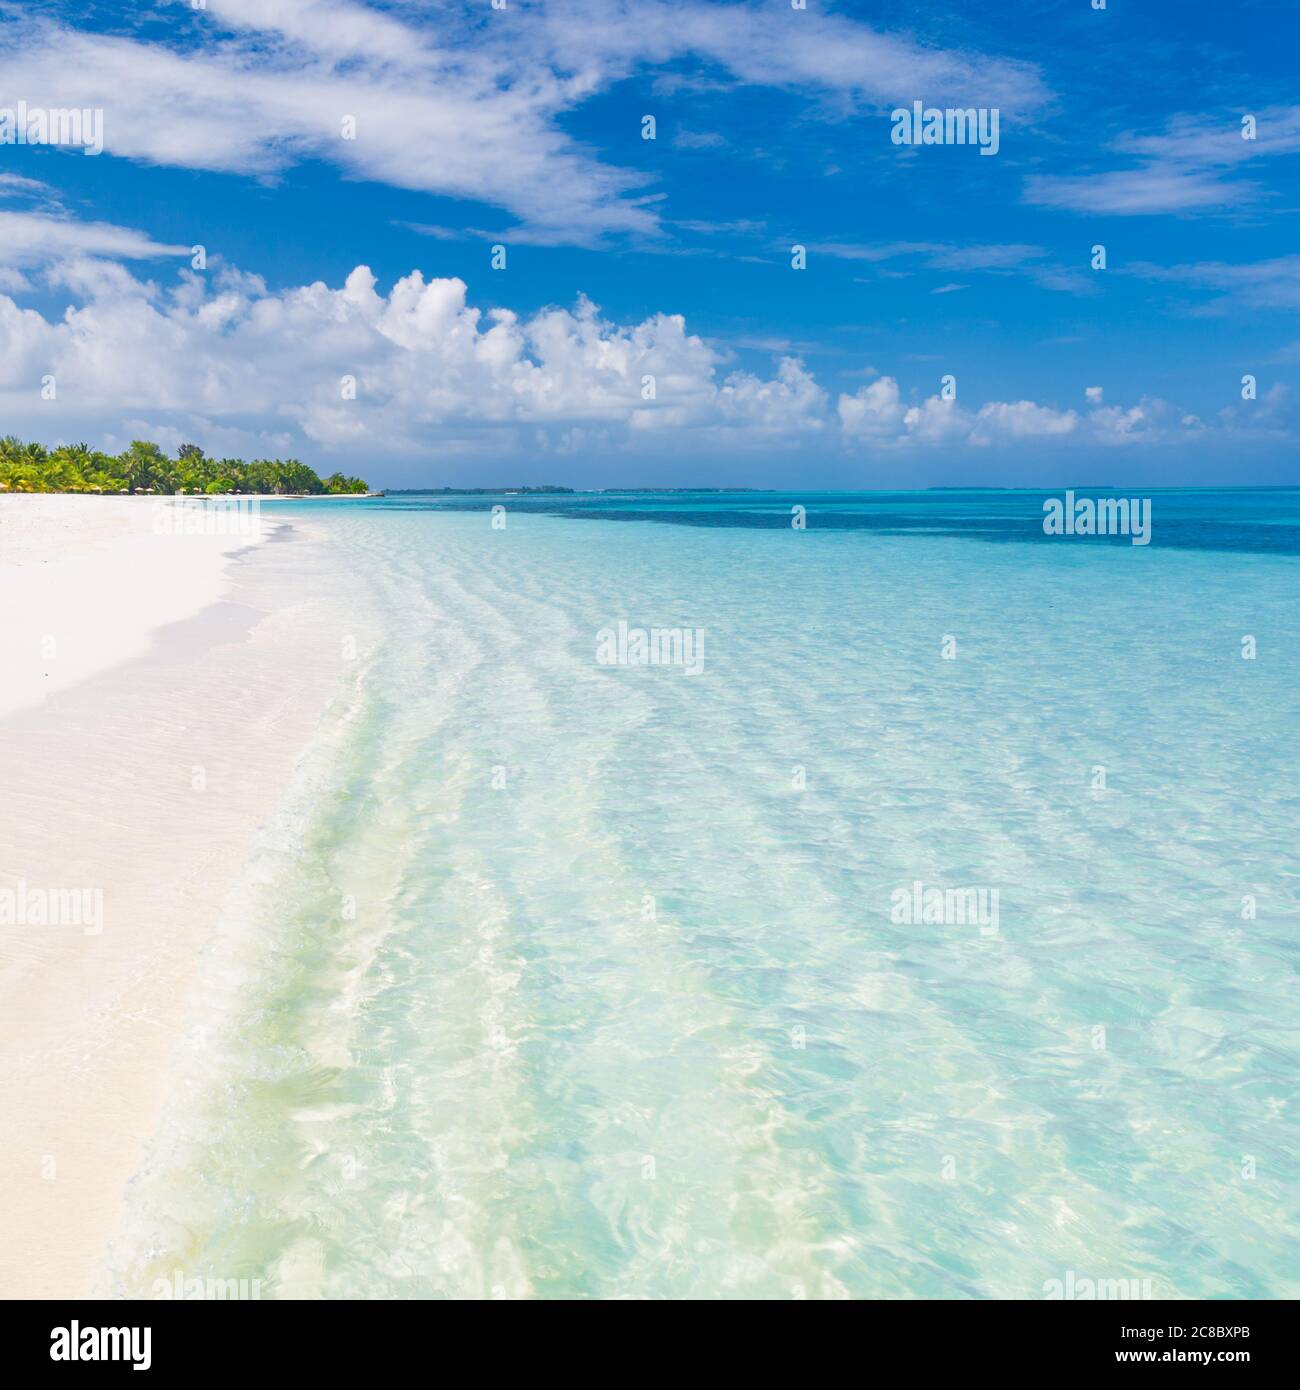 Beach season in luxury summer island. Paradise landscape concept, calm sea, white sand, palm trees. Luxury at beach. Relaxing vibes, holiday travel Stock Photo